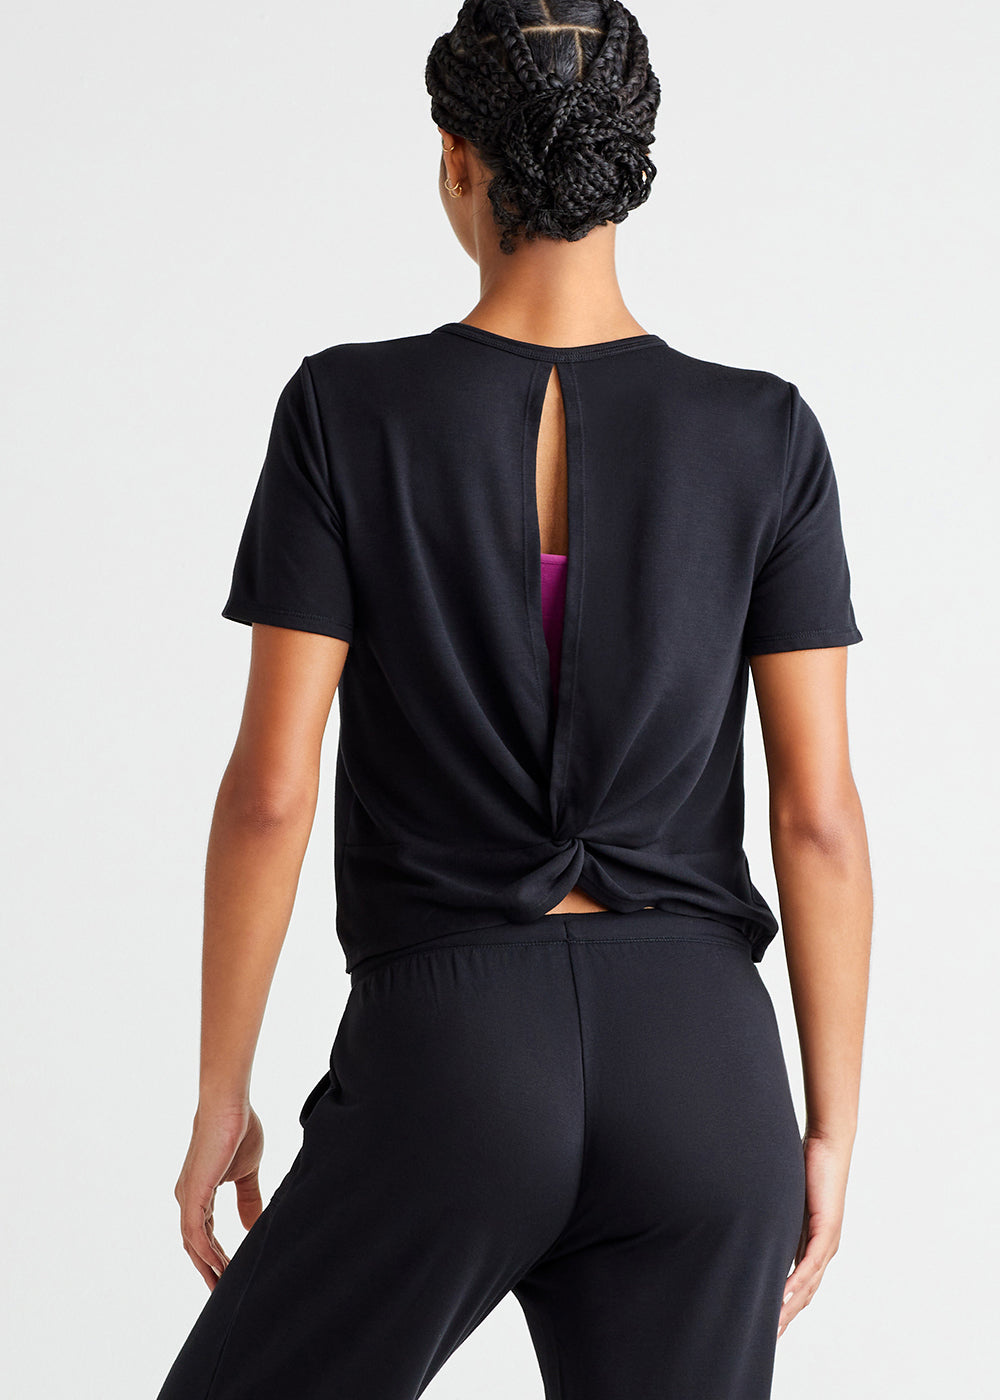 peek-a-boo twist back lounge top - baby french terry and wide leg lounge pant - slub knit in Black worn by a woman facing back with arms at sides Yummie